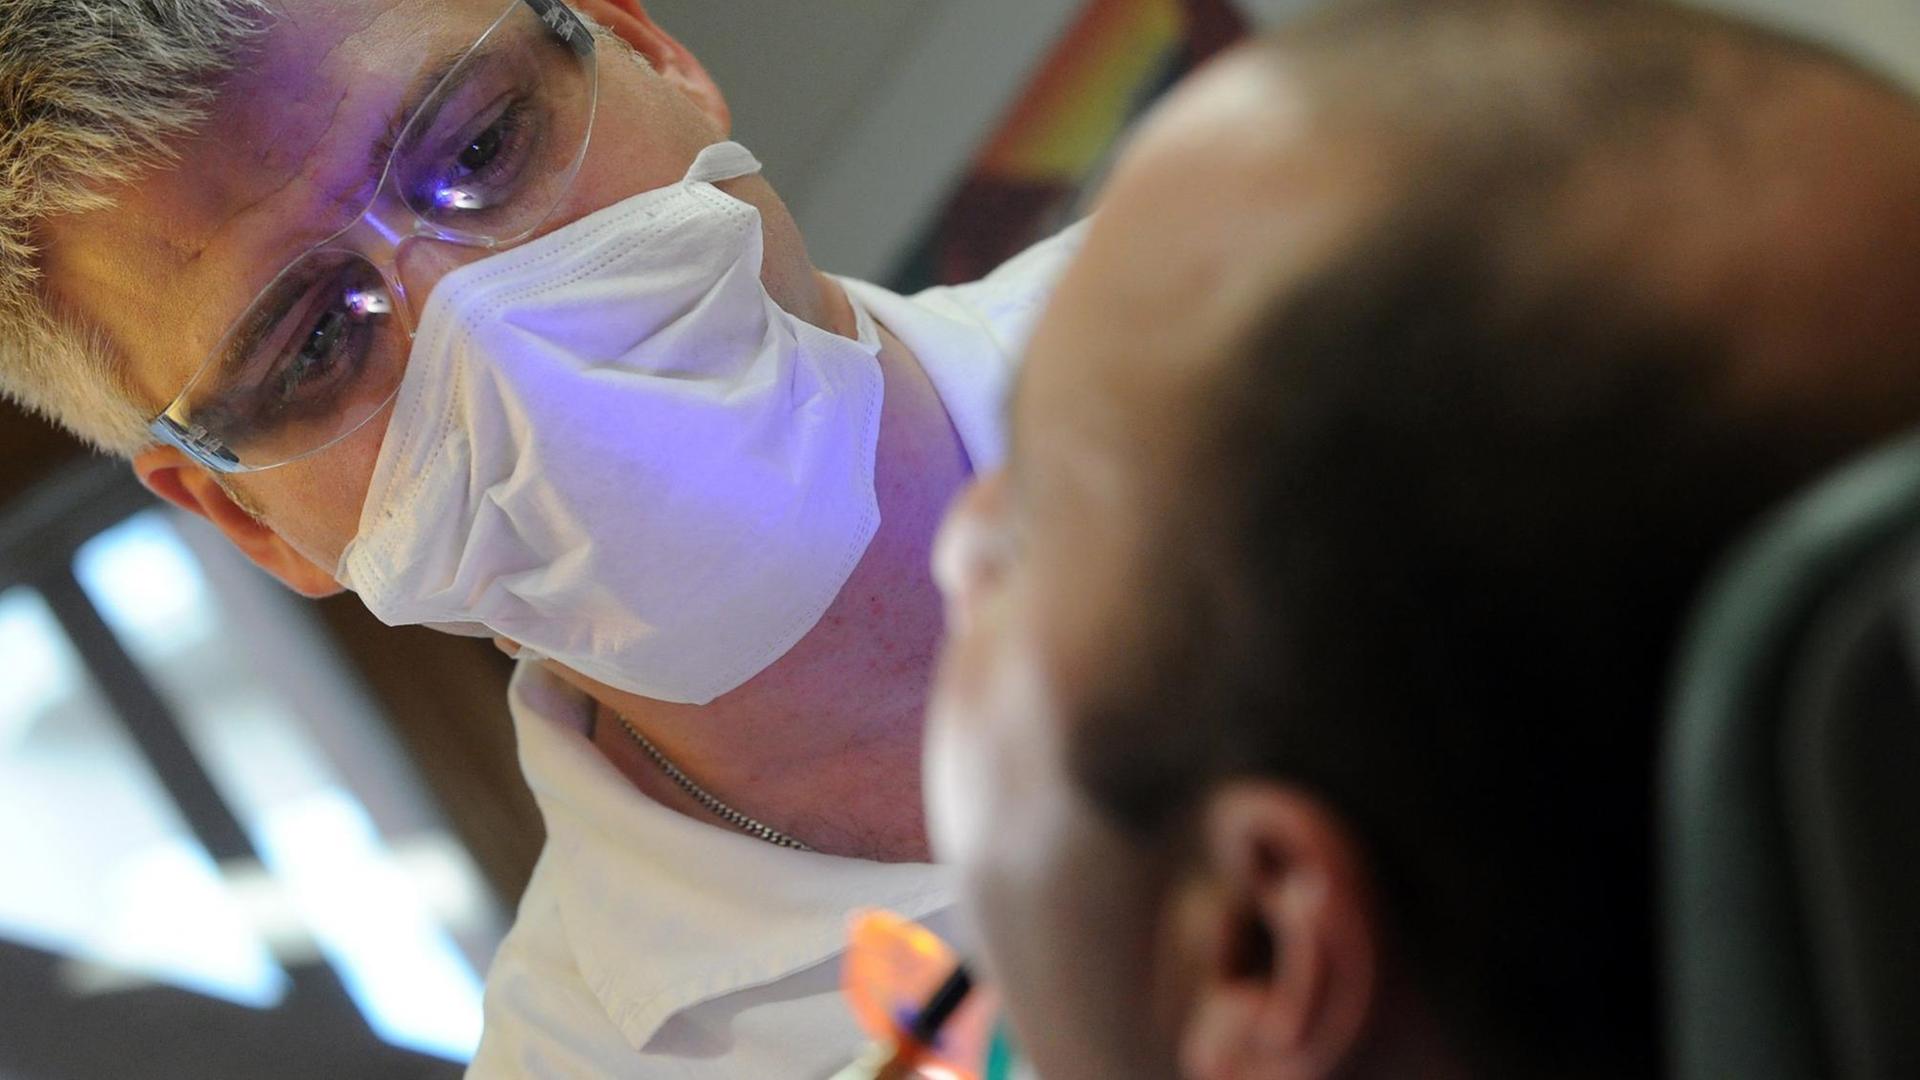 A patient gets dental treatment at a local health center in Budapest, on November 27, 2012. Every year some 80,000 patients from Western Europe travel to Hungary to pay a visit to the dentist. Hungary has in fact for many years been the leading destination in Europe for dental tourism, a phenomen which has brought benefits across the economy. AFP PHOTO / ATTILA KISBENEDEK / AFP PHOTO / ATTILA KISBENEDEK